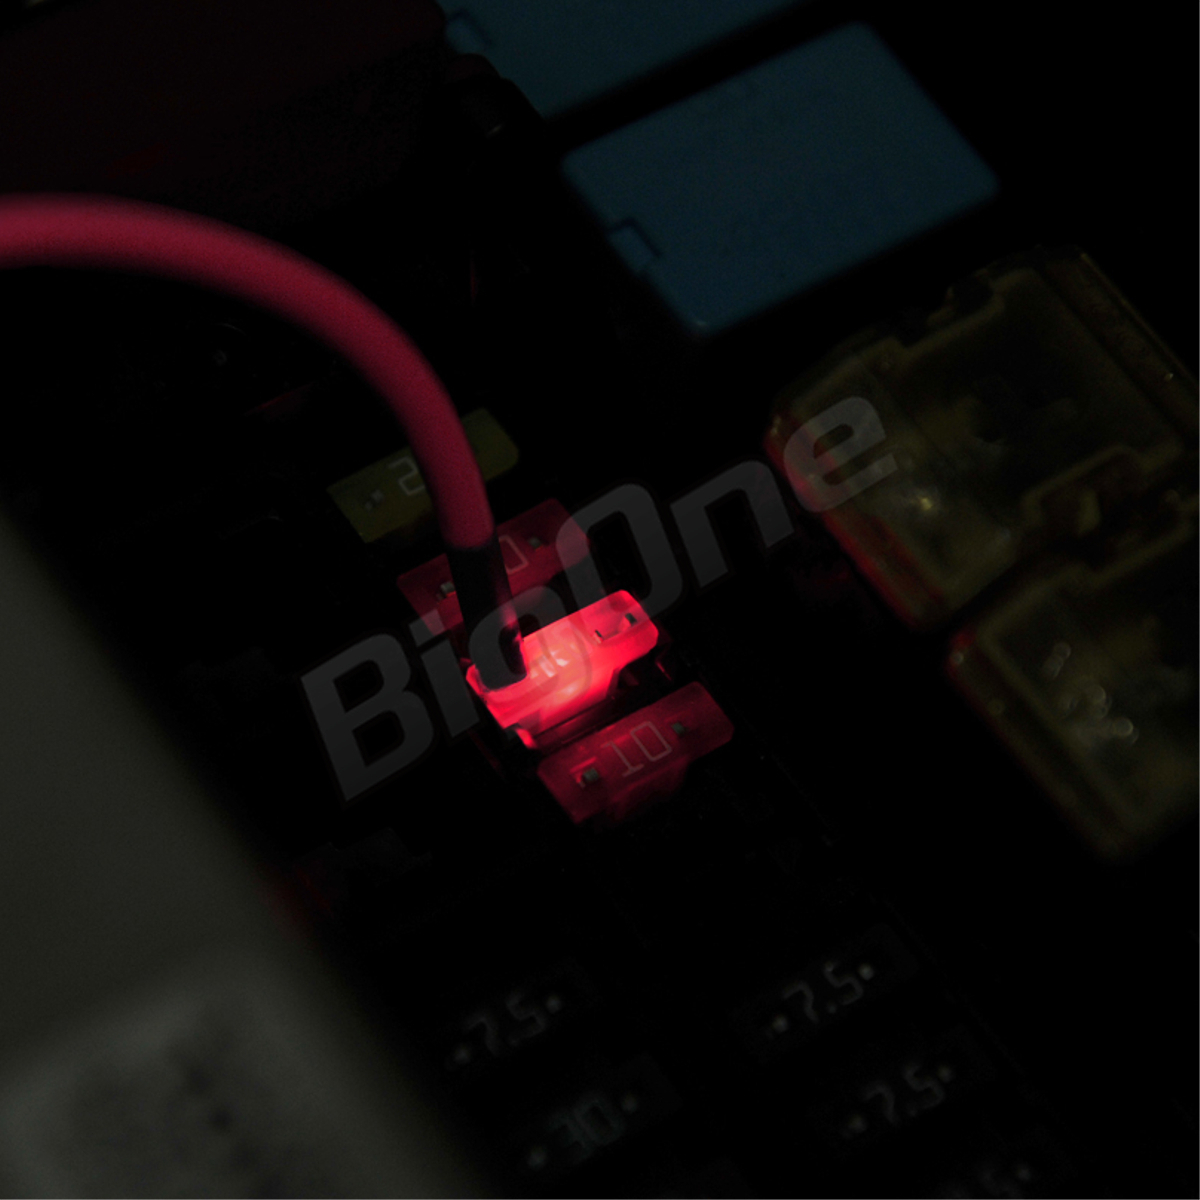 BigOne torn .. light ...... indicator built-in Mini flat type fuse power supply 10A ASP LED chigar lighter ETC drive recorder. connection 